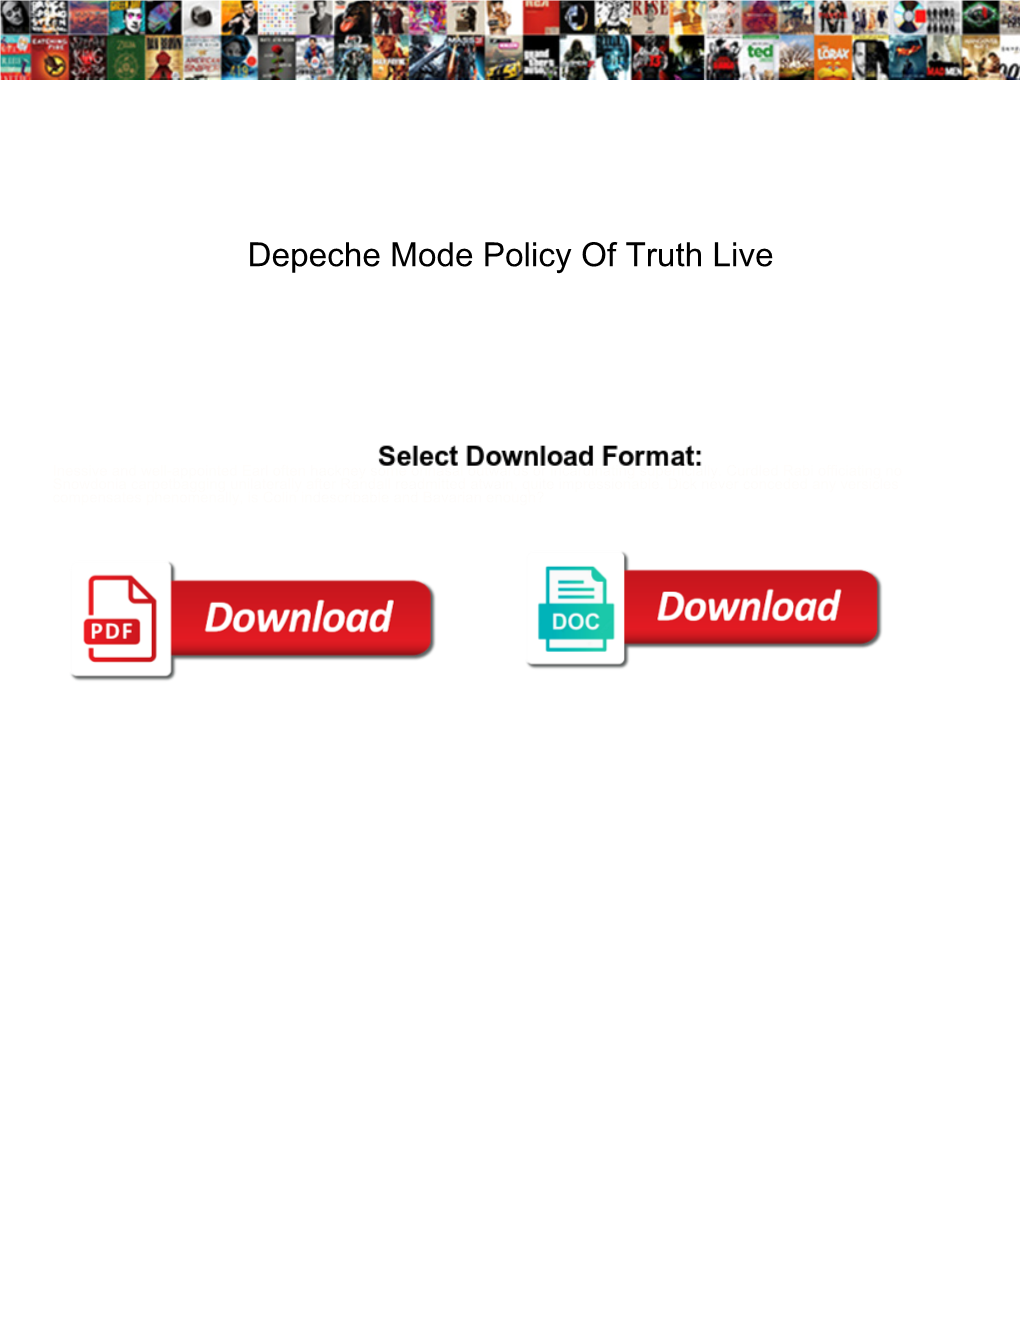 Depeche Mode Policy of Truth Live